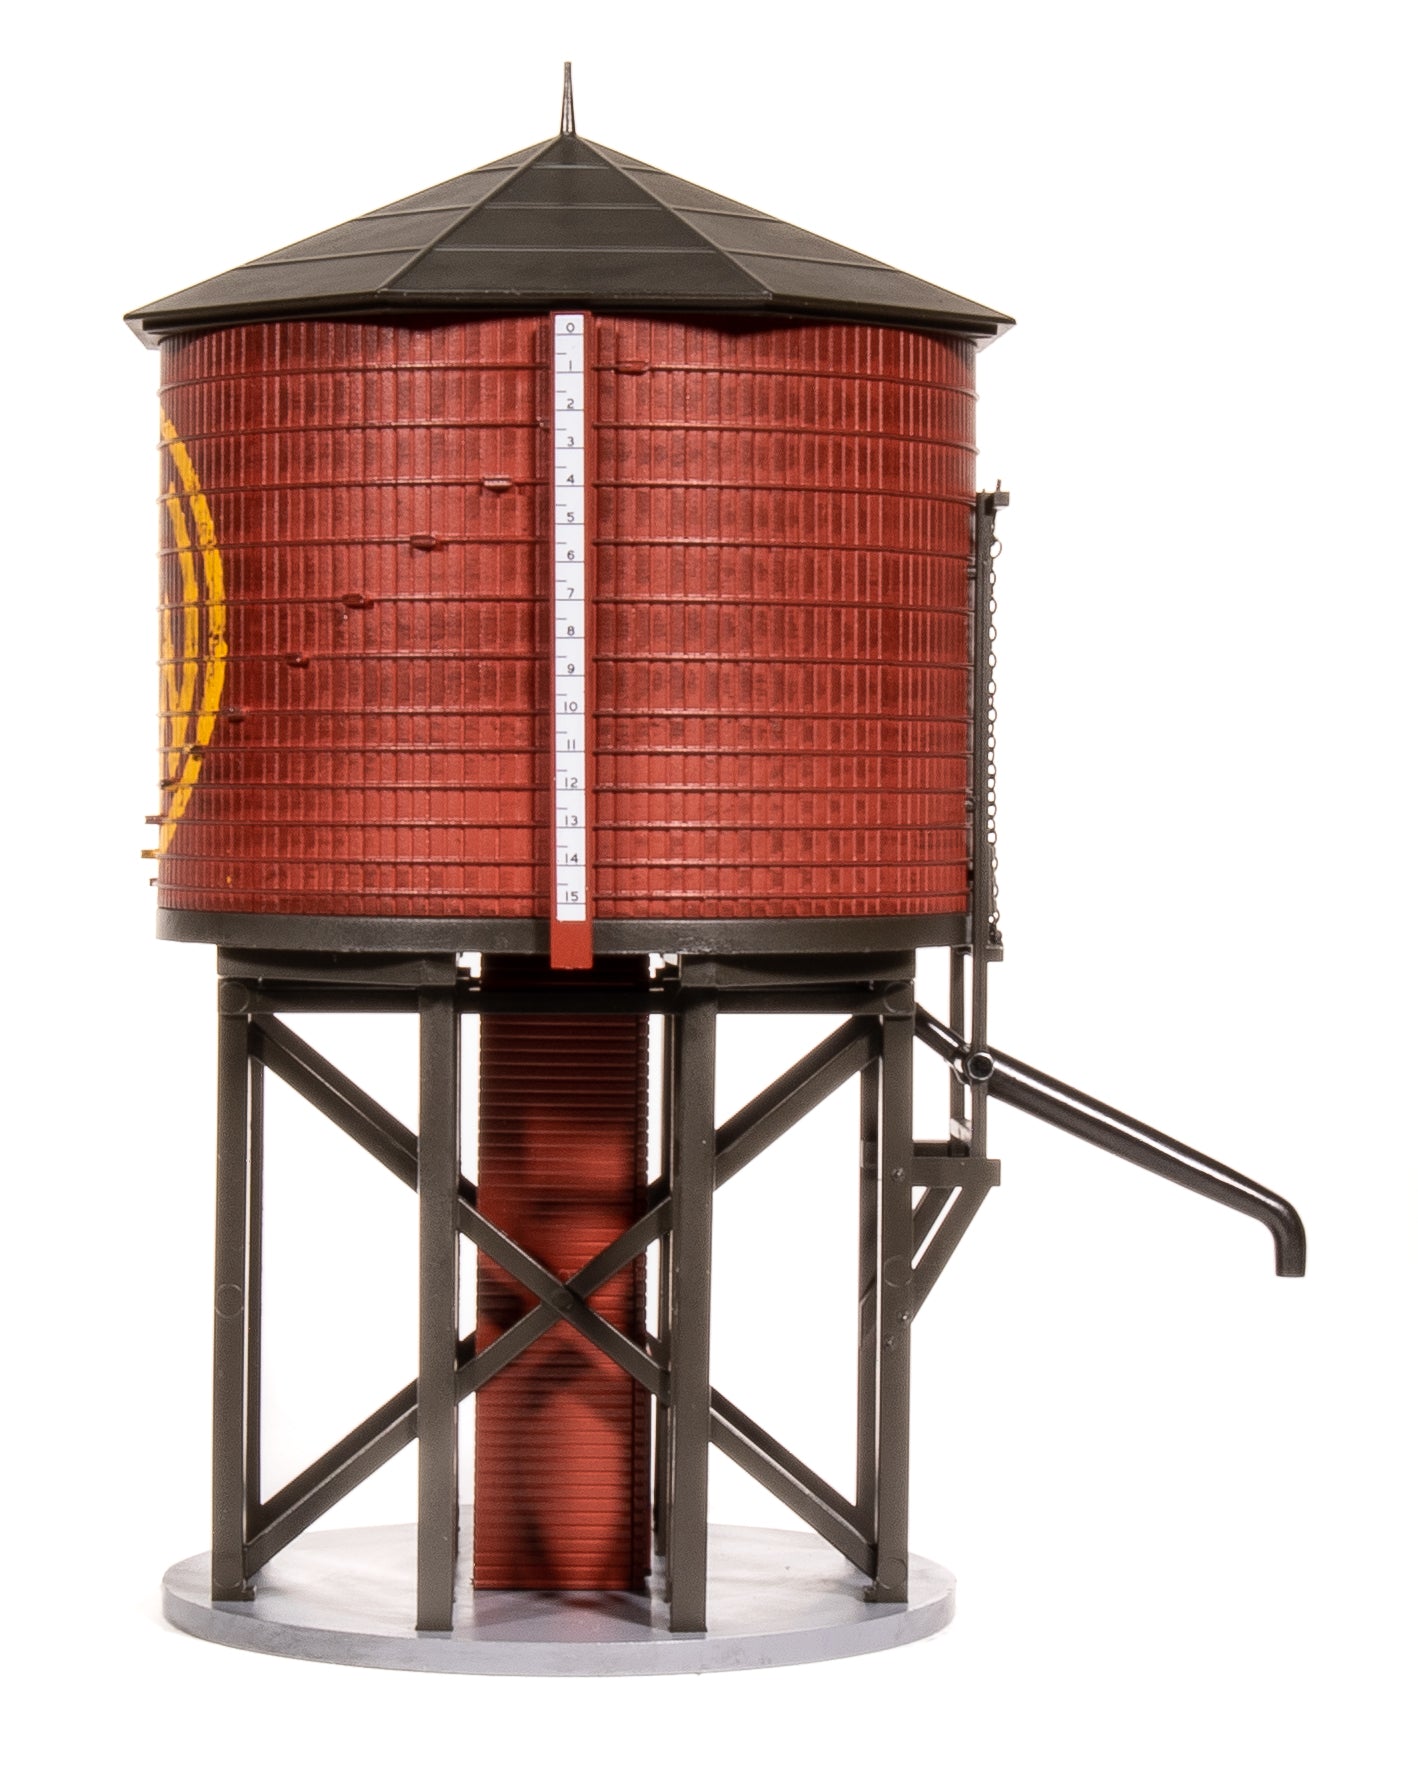 7920 Operating Water Tower w/ Sound, N&W, Weathered, HO Default Title